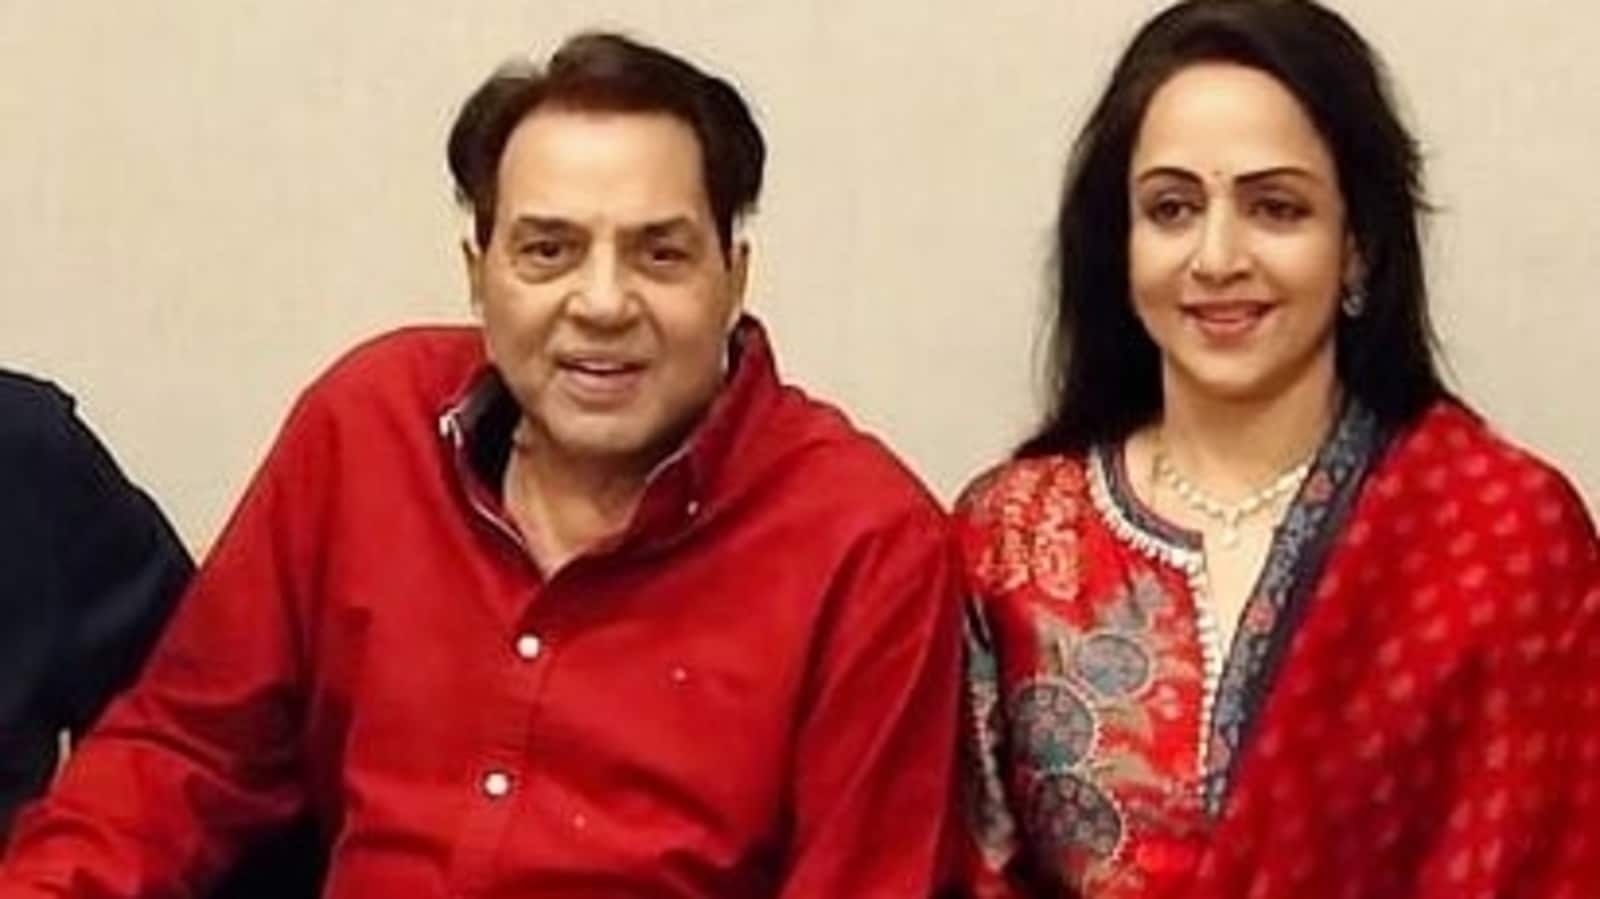 Hema Malini posts recent picture with Dharmenda because she ‘felt like sharing’ it